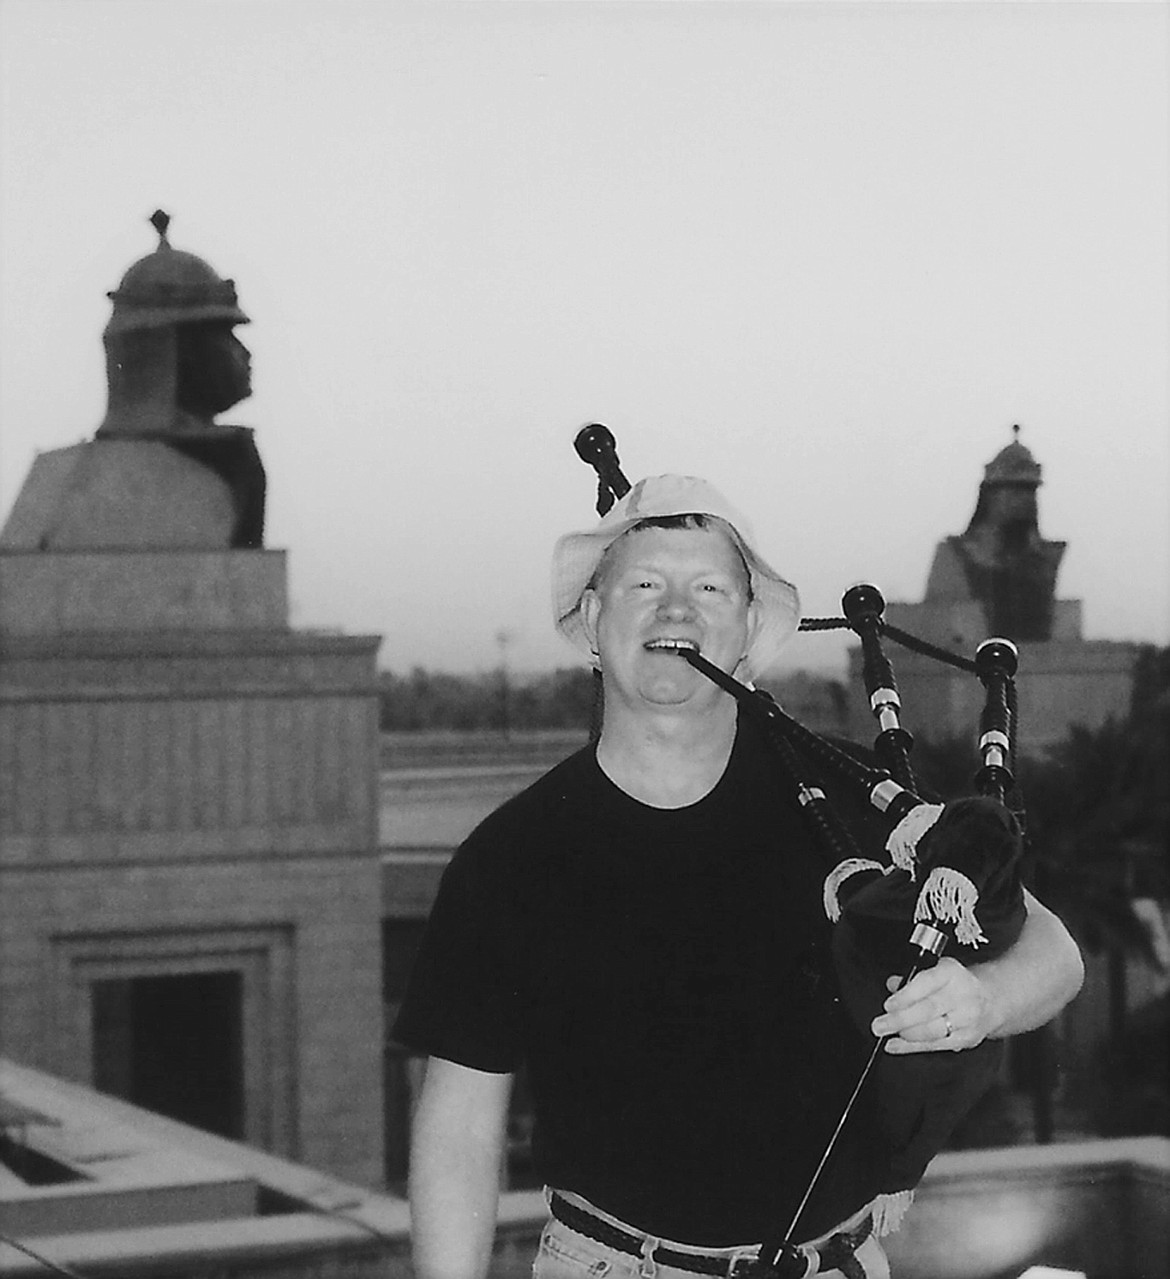 Mike Gilbert pipes at Saddam Hussein&#146;s palace in Baghdad, Iraq in 2003. Gilbert was a U.S. Air Force chaplain and also played bagpipes at military funerals, celebrations and other occasions during his career. (Courtesy of Mike Gilbert)